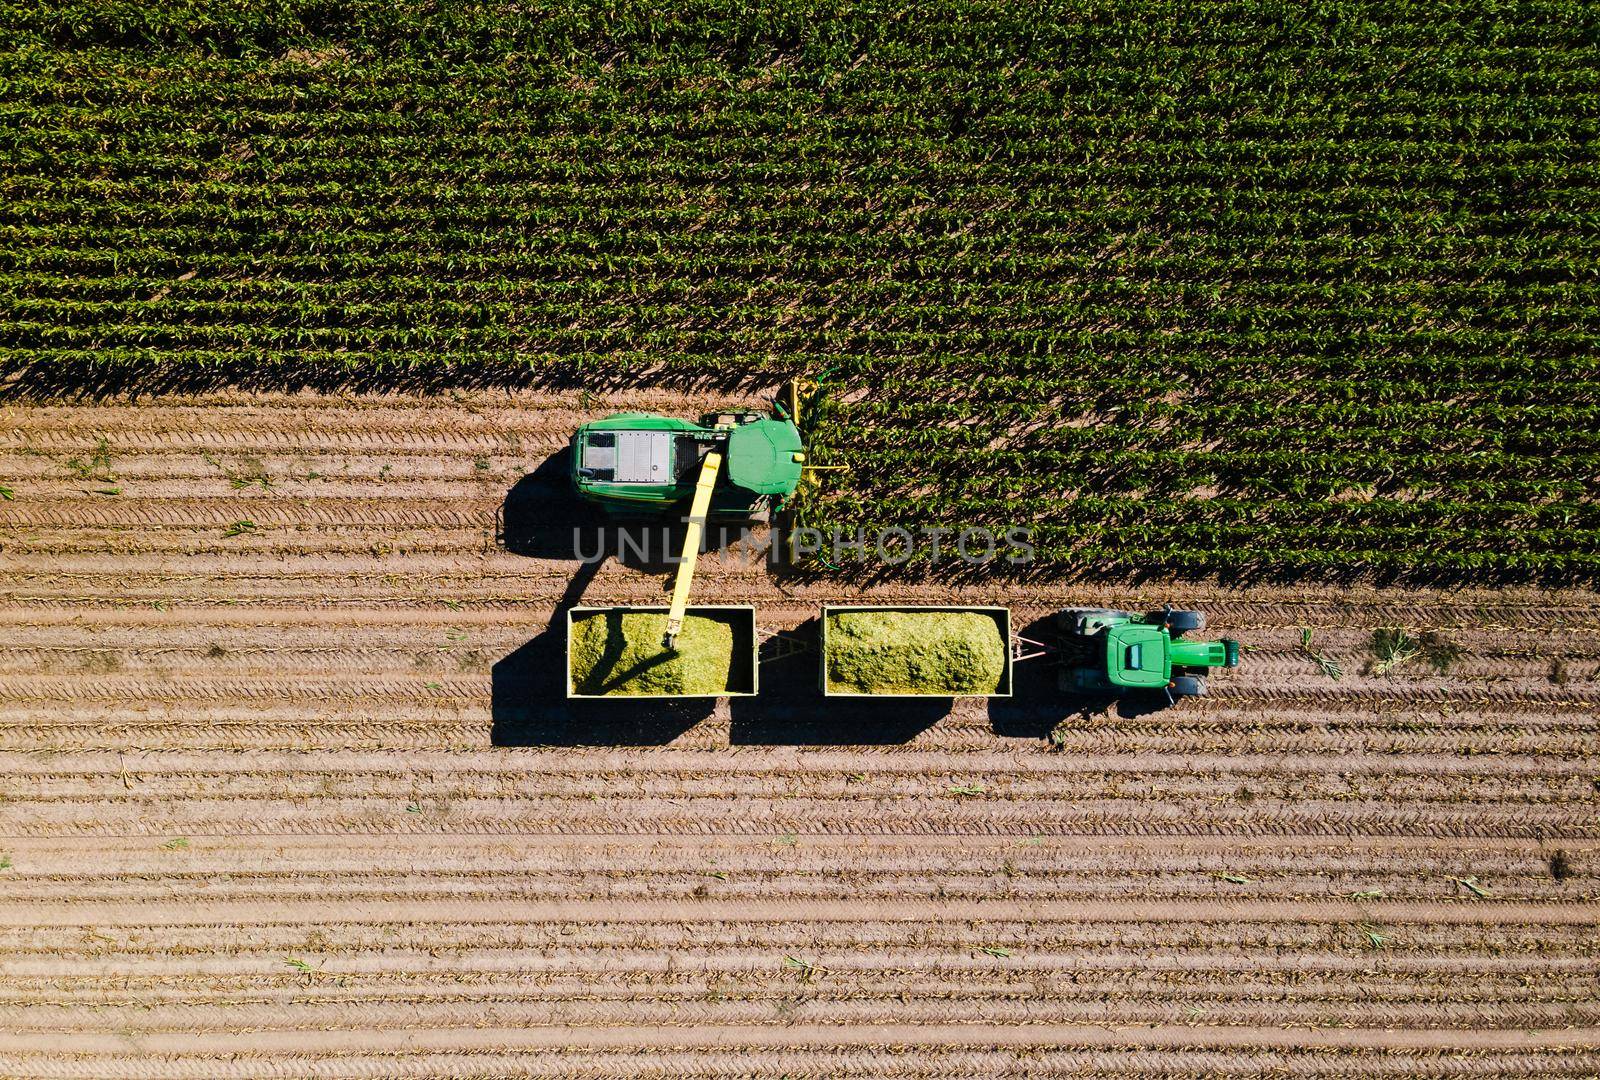 Corn harvest in the field seen from above with harvester and tractor in team